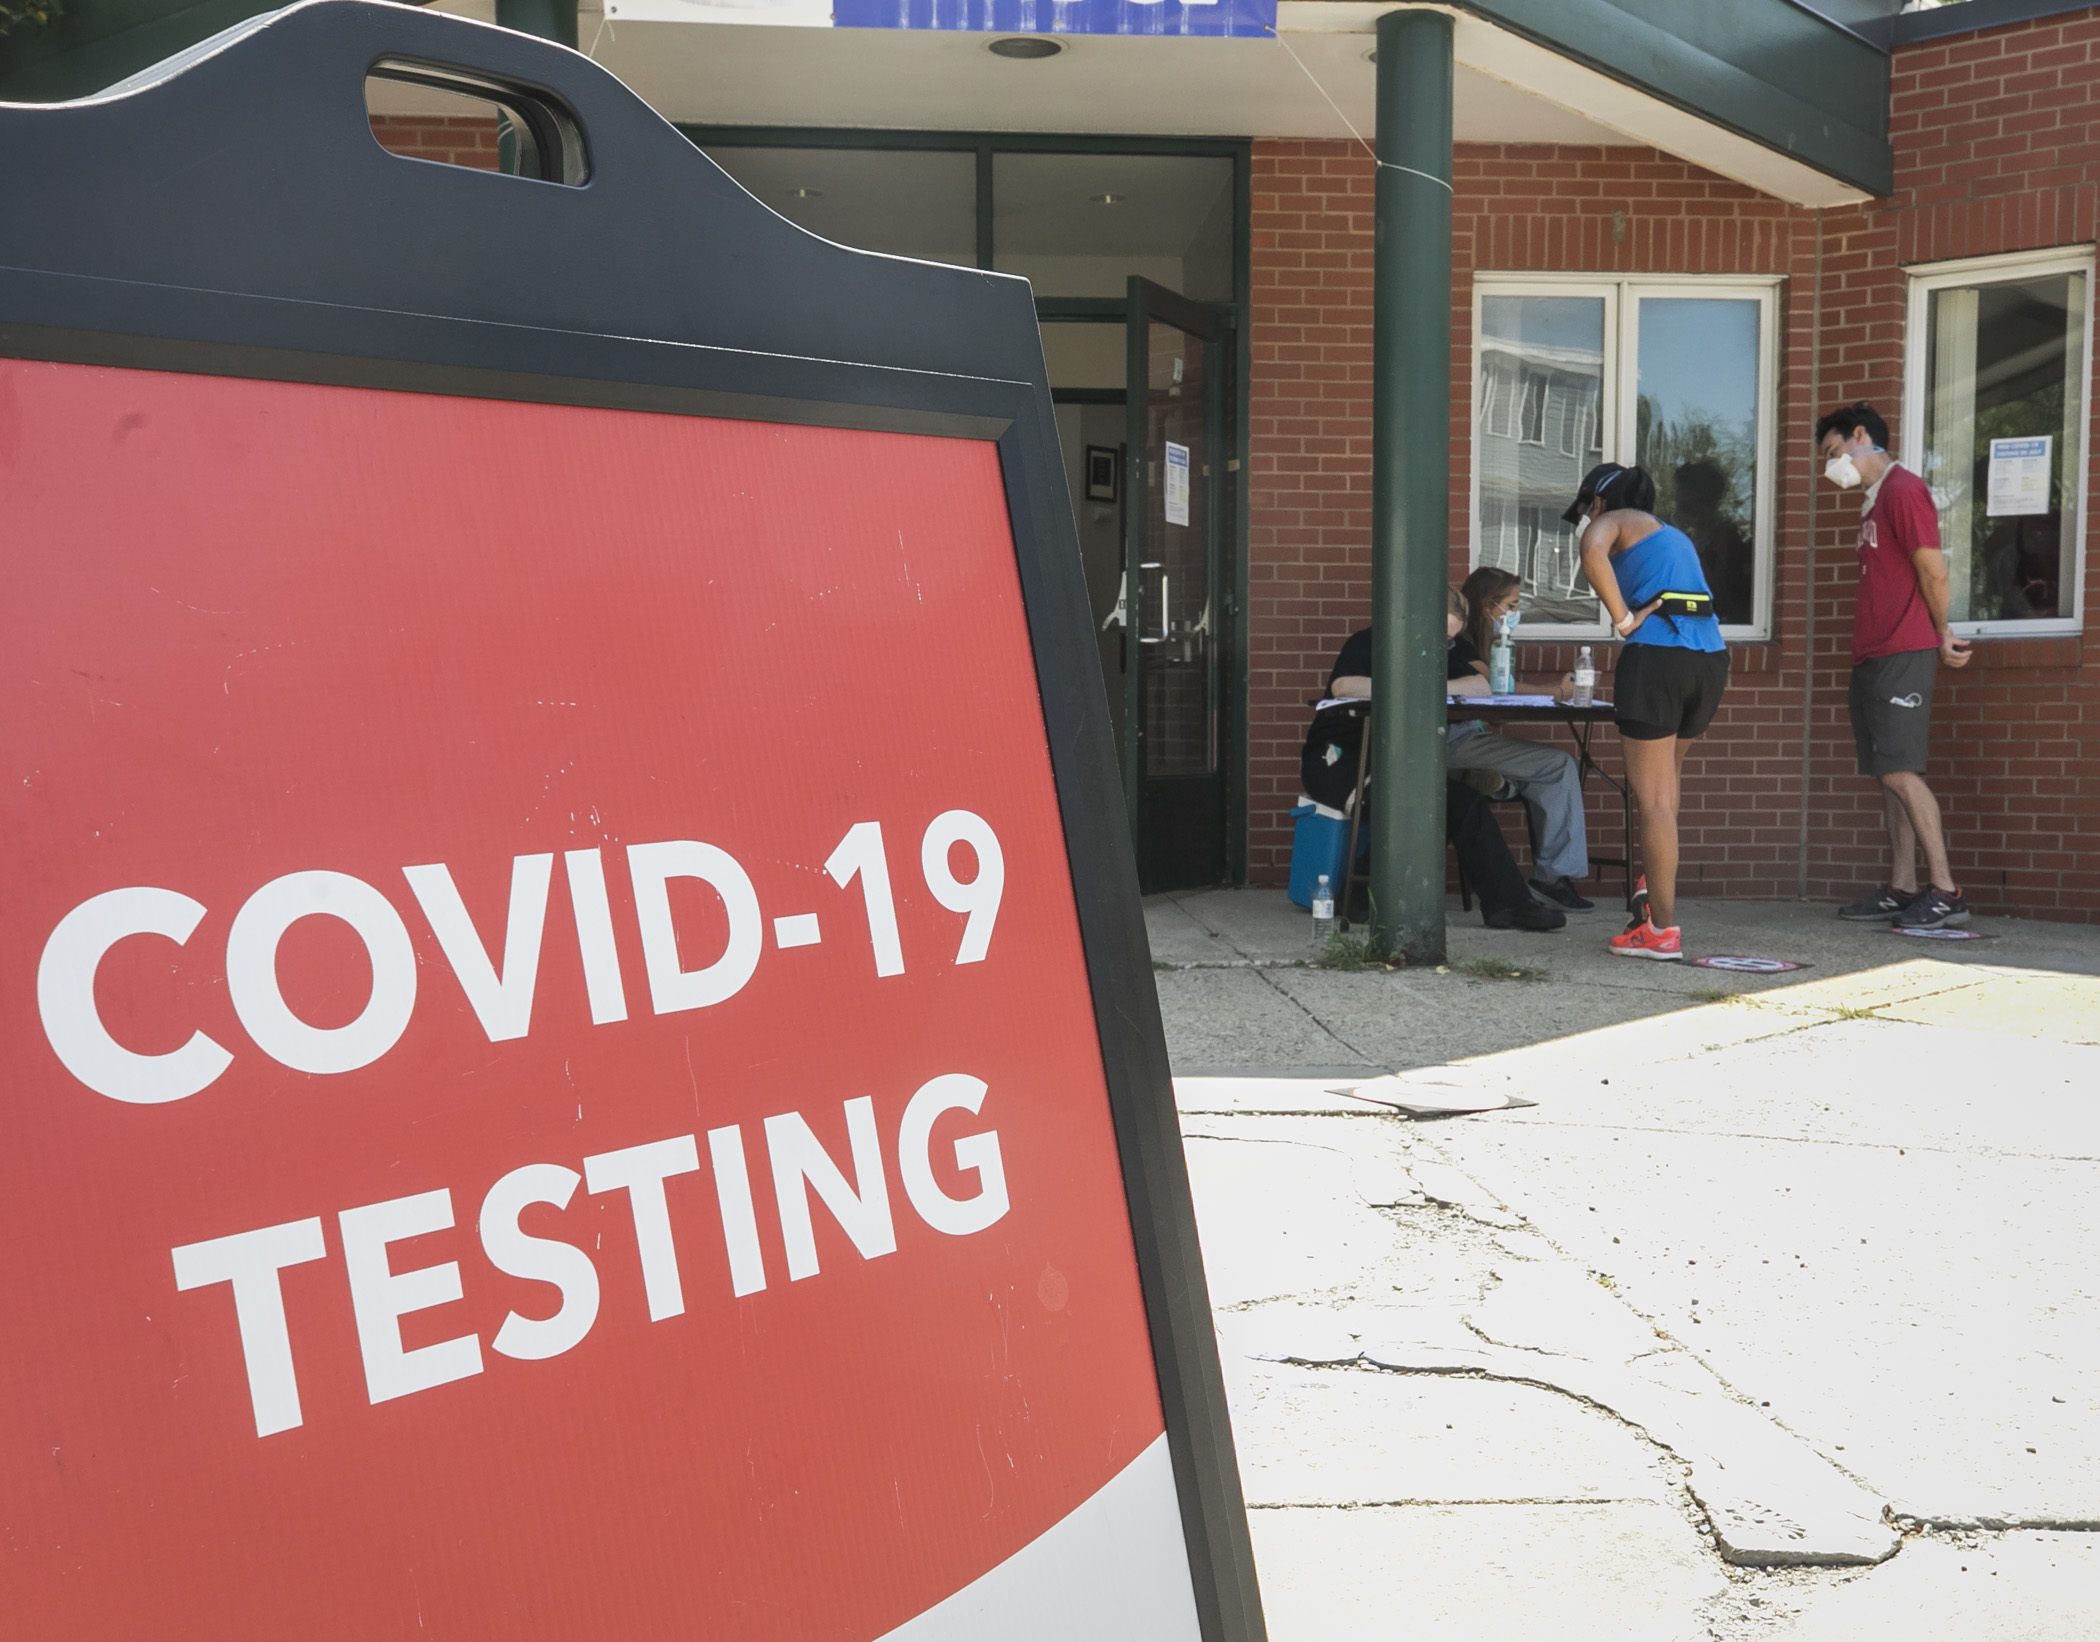 Covid-19 Testing At Four Sites In Cambridge New Appointment Slots To Be Added Soon - City Of Cambridge Ma